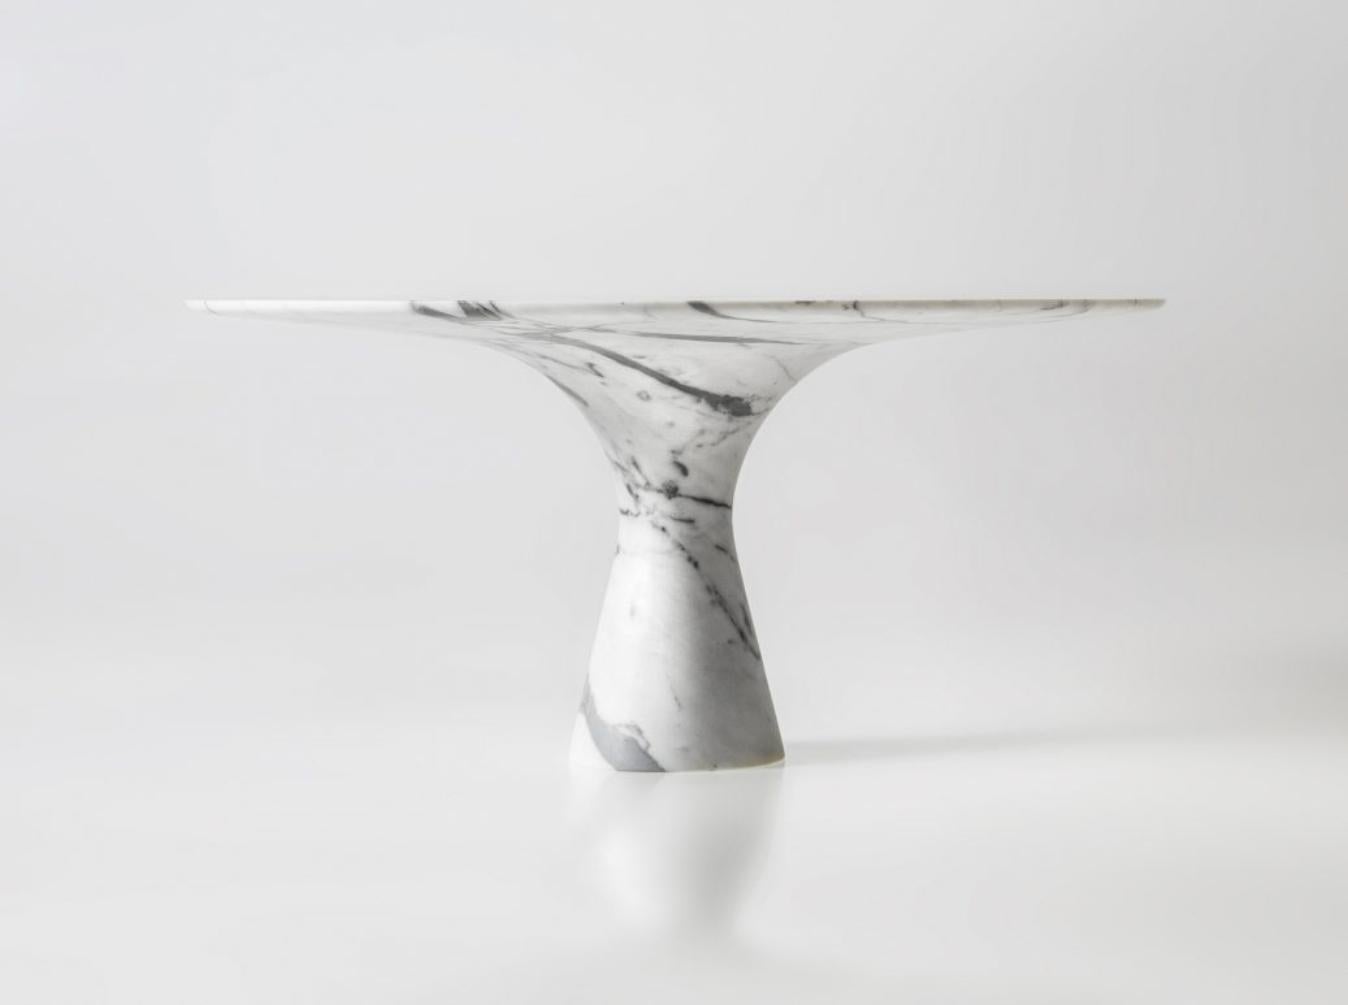 Bianco Statuarietto Refined Contemporary Marble Dining Table 160/75
Dimensions: 160 x 75 cm
Materials: Bianco Statuarietto
Angelo is the essence of a round table in natural stone, a sculptural shape in robust material with elegant lines and